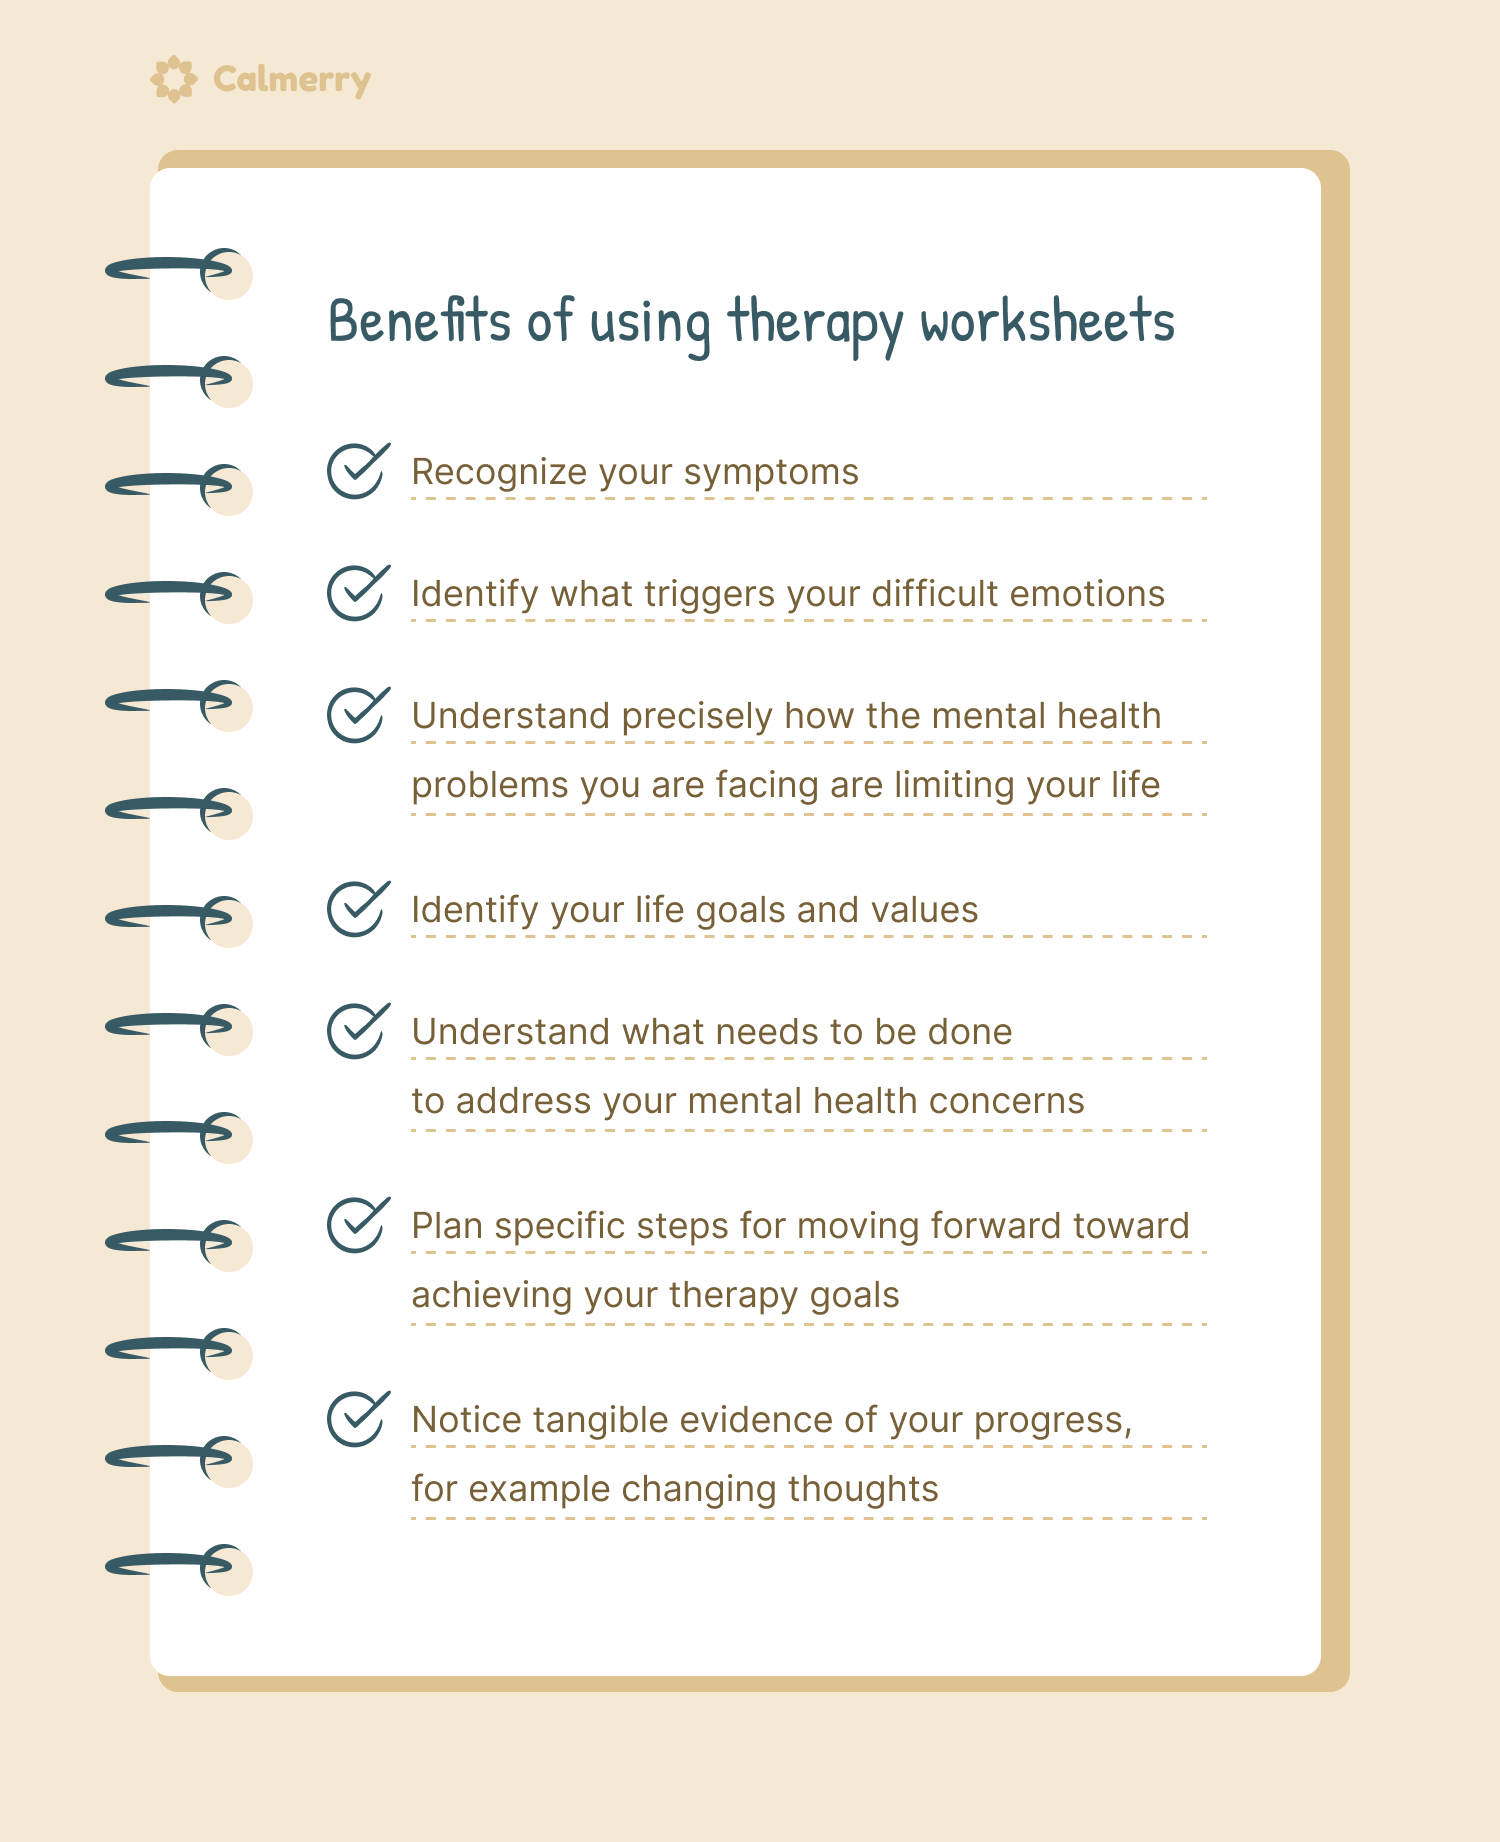 Benefits of using therapy worksheets for mental health